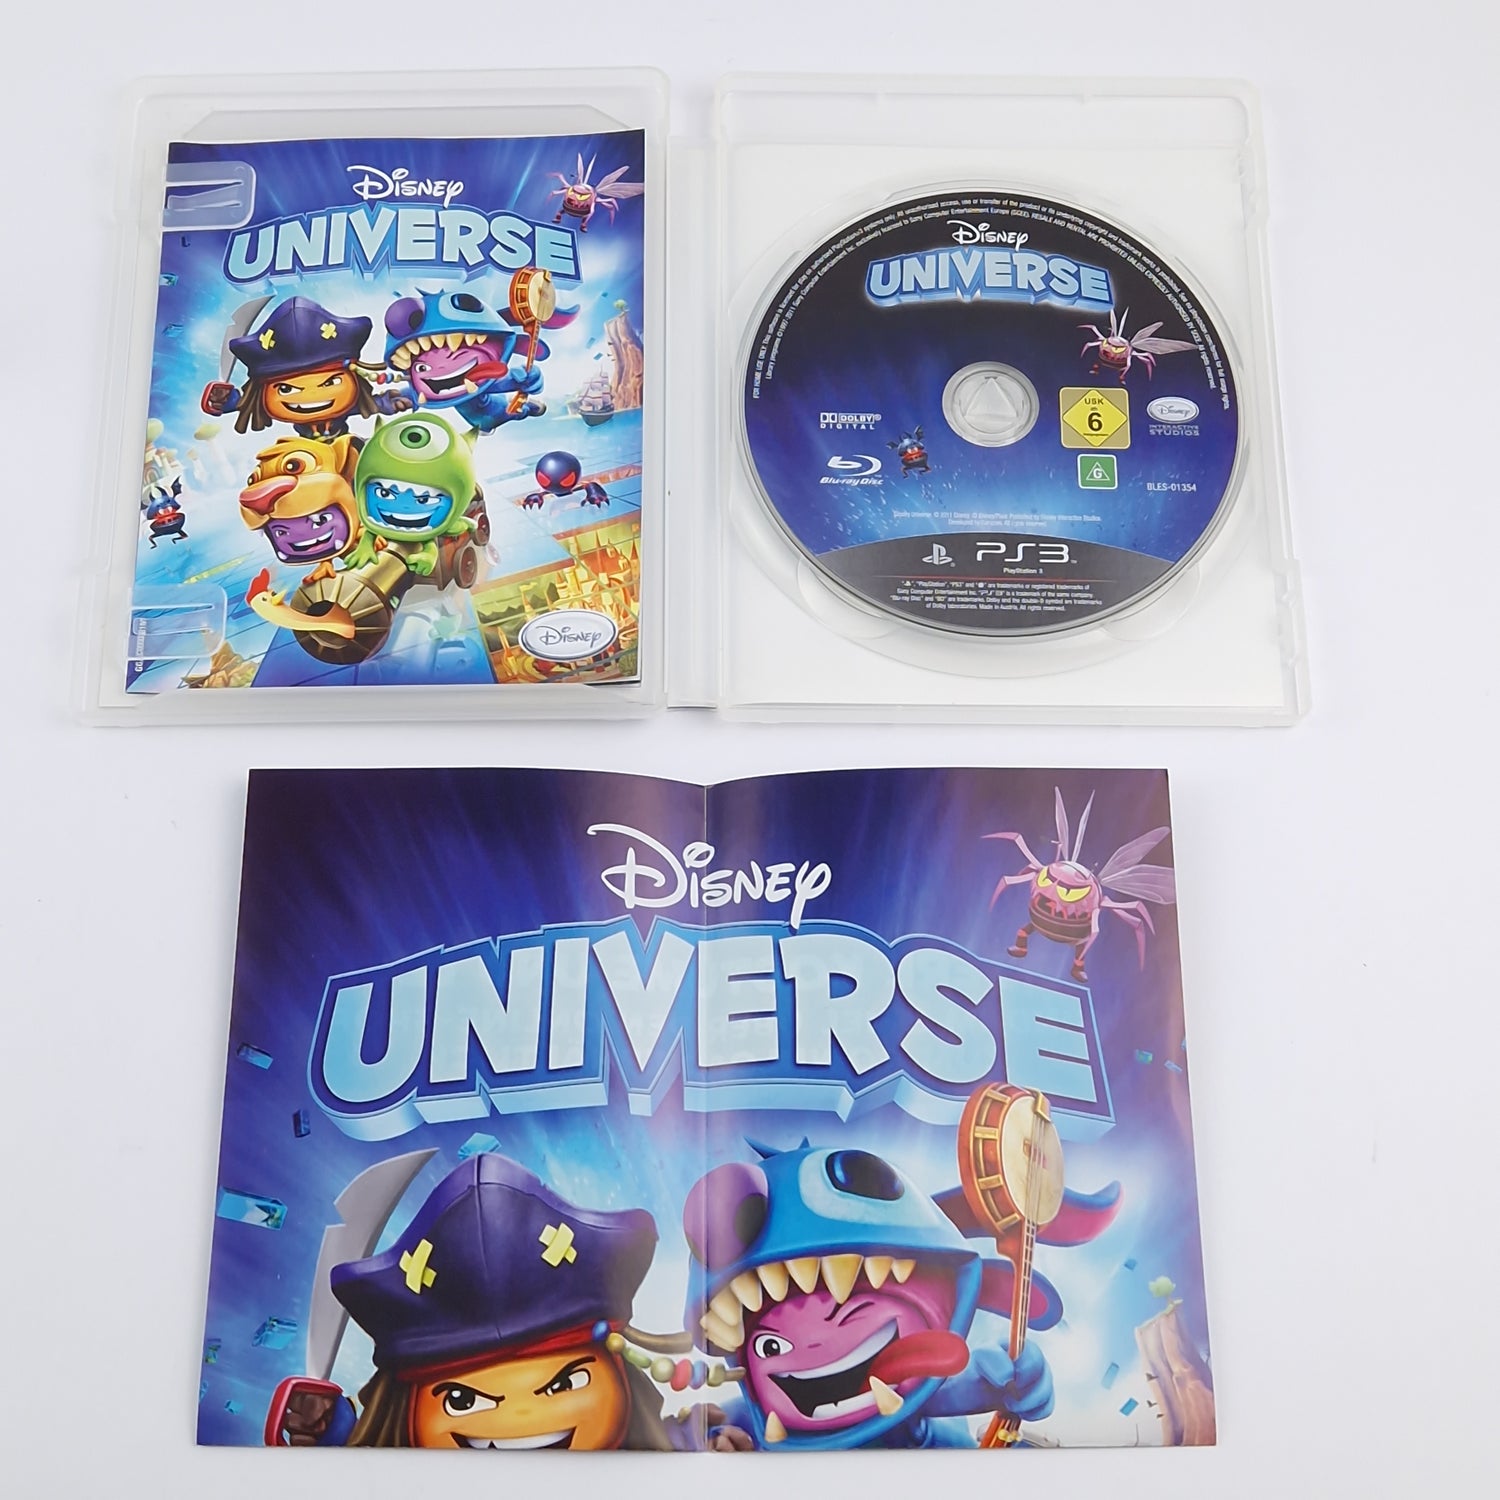 Sony Playstation 3 Game: Disney Universe - OVP Instructions PAL | PS3